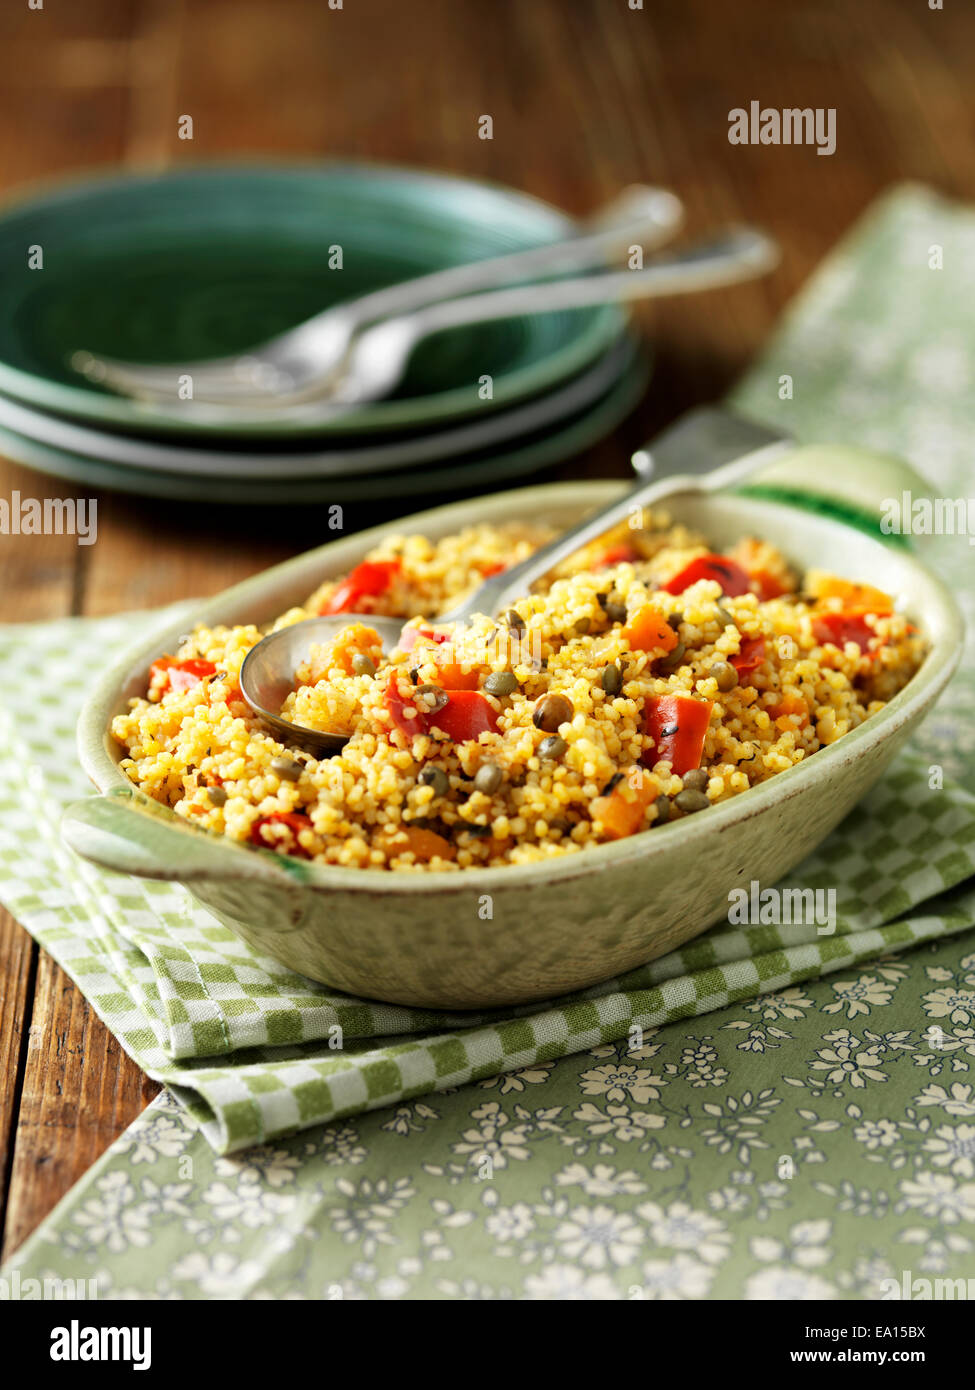 Vegetable cous cous side dish for two Stock Photo